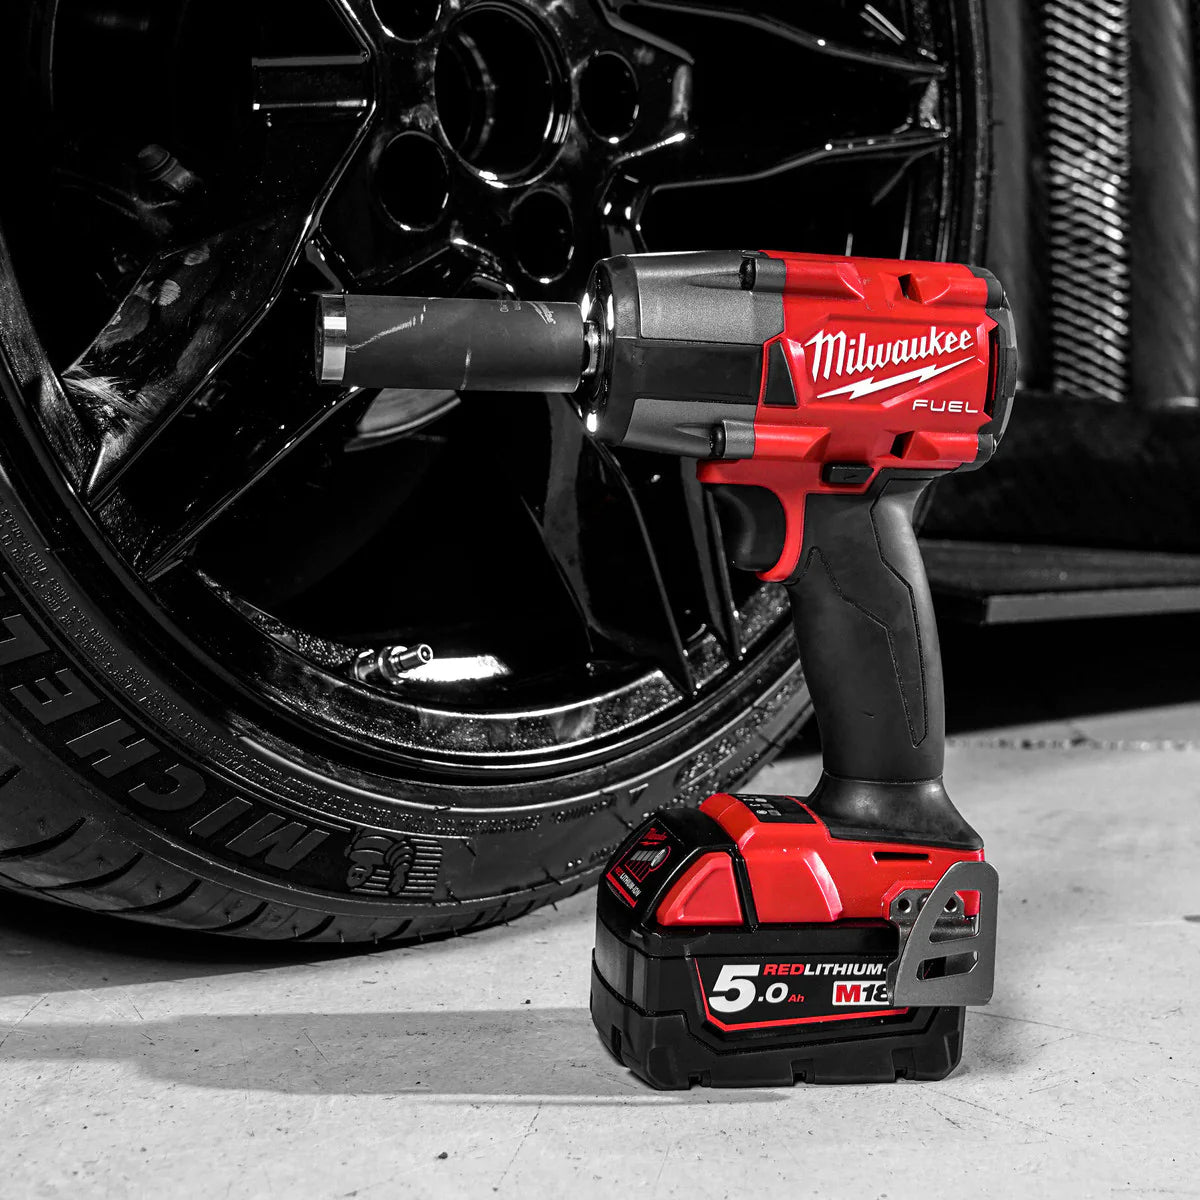 Milwaukee M18FPP2F3-502X 18V Fuel Combi Drill + Impact Wrench with 2 x 5.0Ah Battery Charger & Case 4933492641